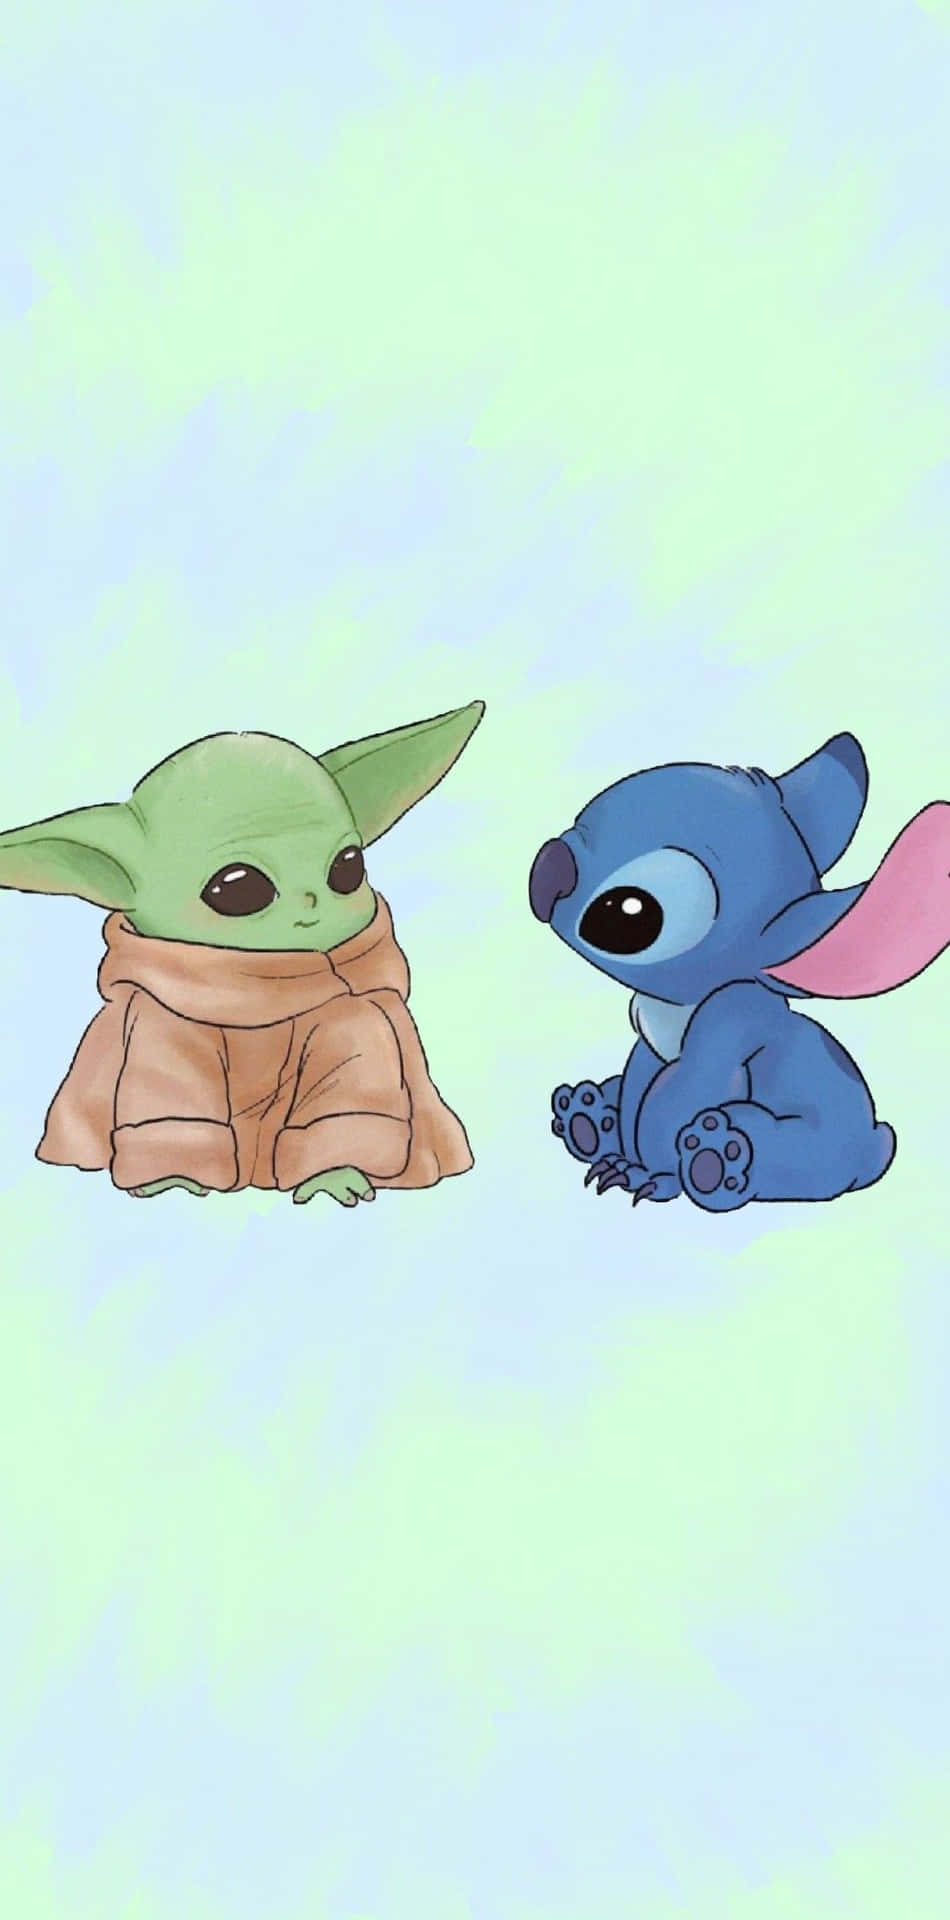 Download A Whimsical Baby Yoda Aesthetic Wallpaper | Wallpapers.com